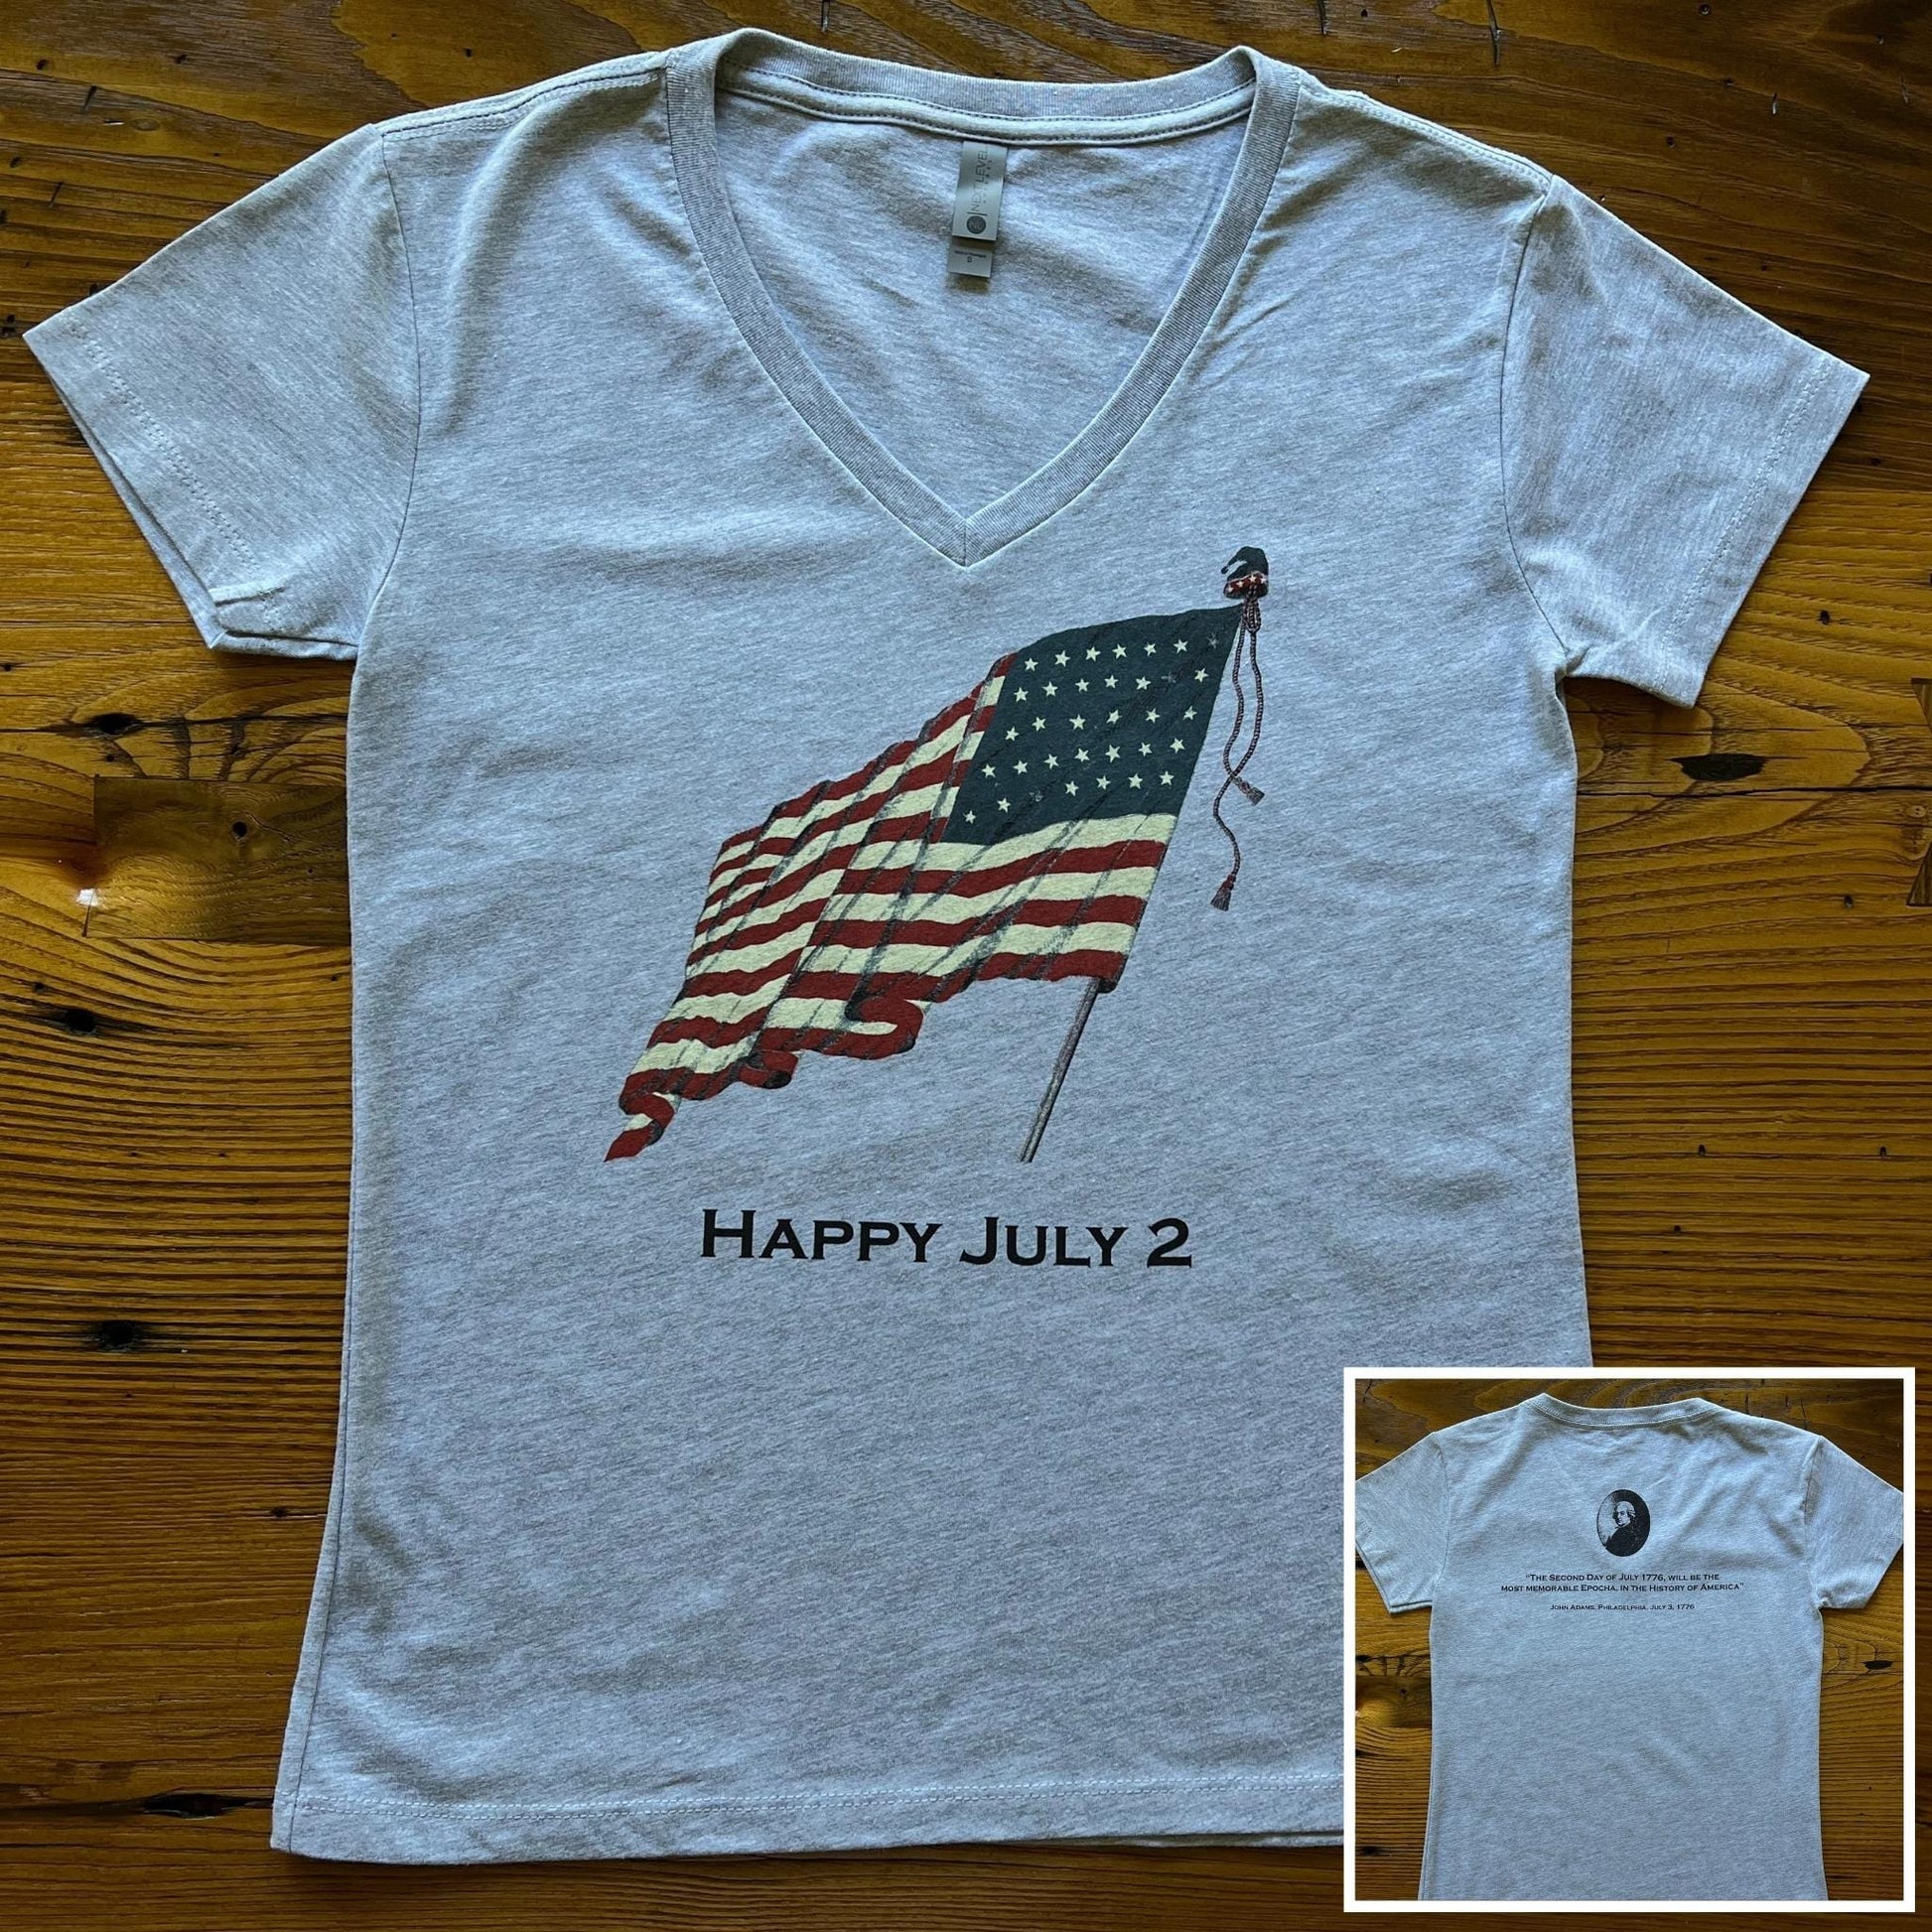  Heather Grey "Happy July 2” v-neck shirt with John Adams and his quote on the back from the history list store